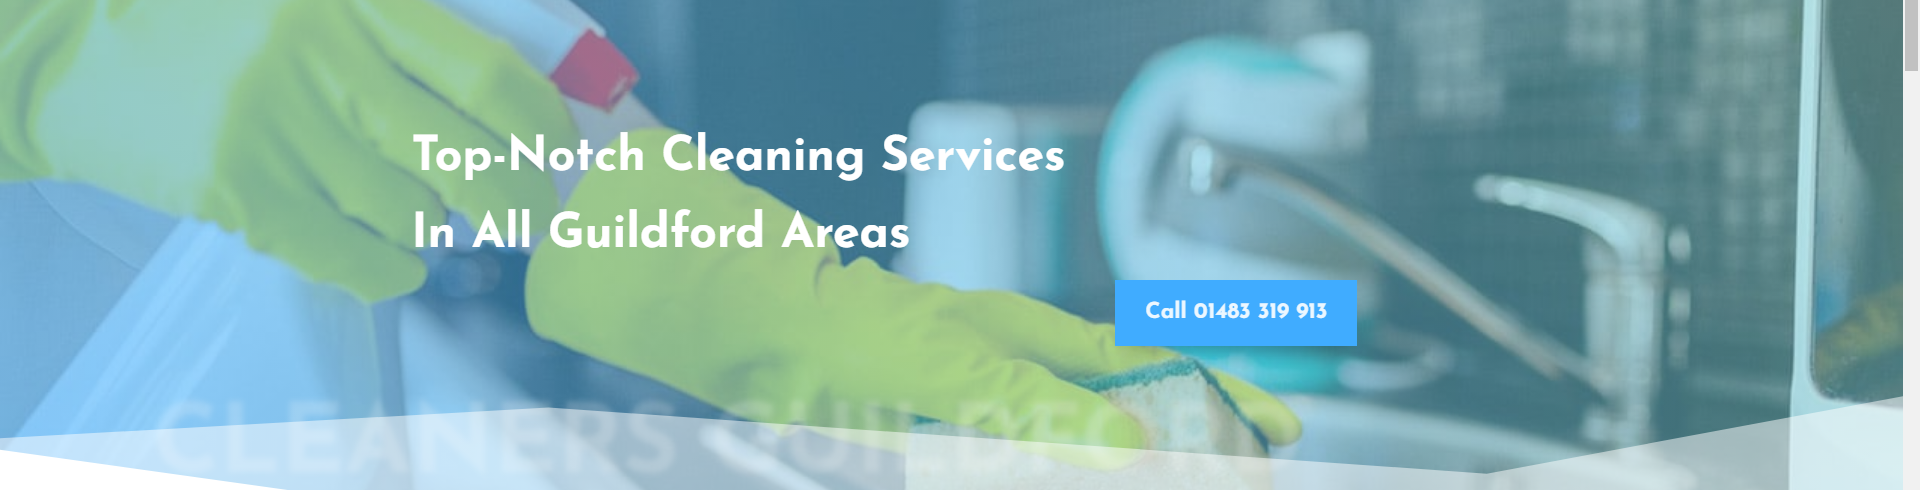 banner cleaners guildford